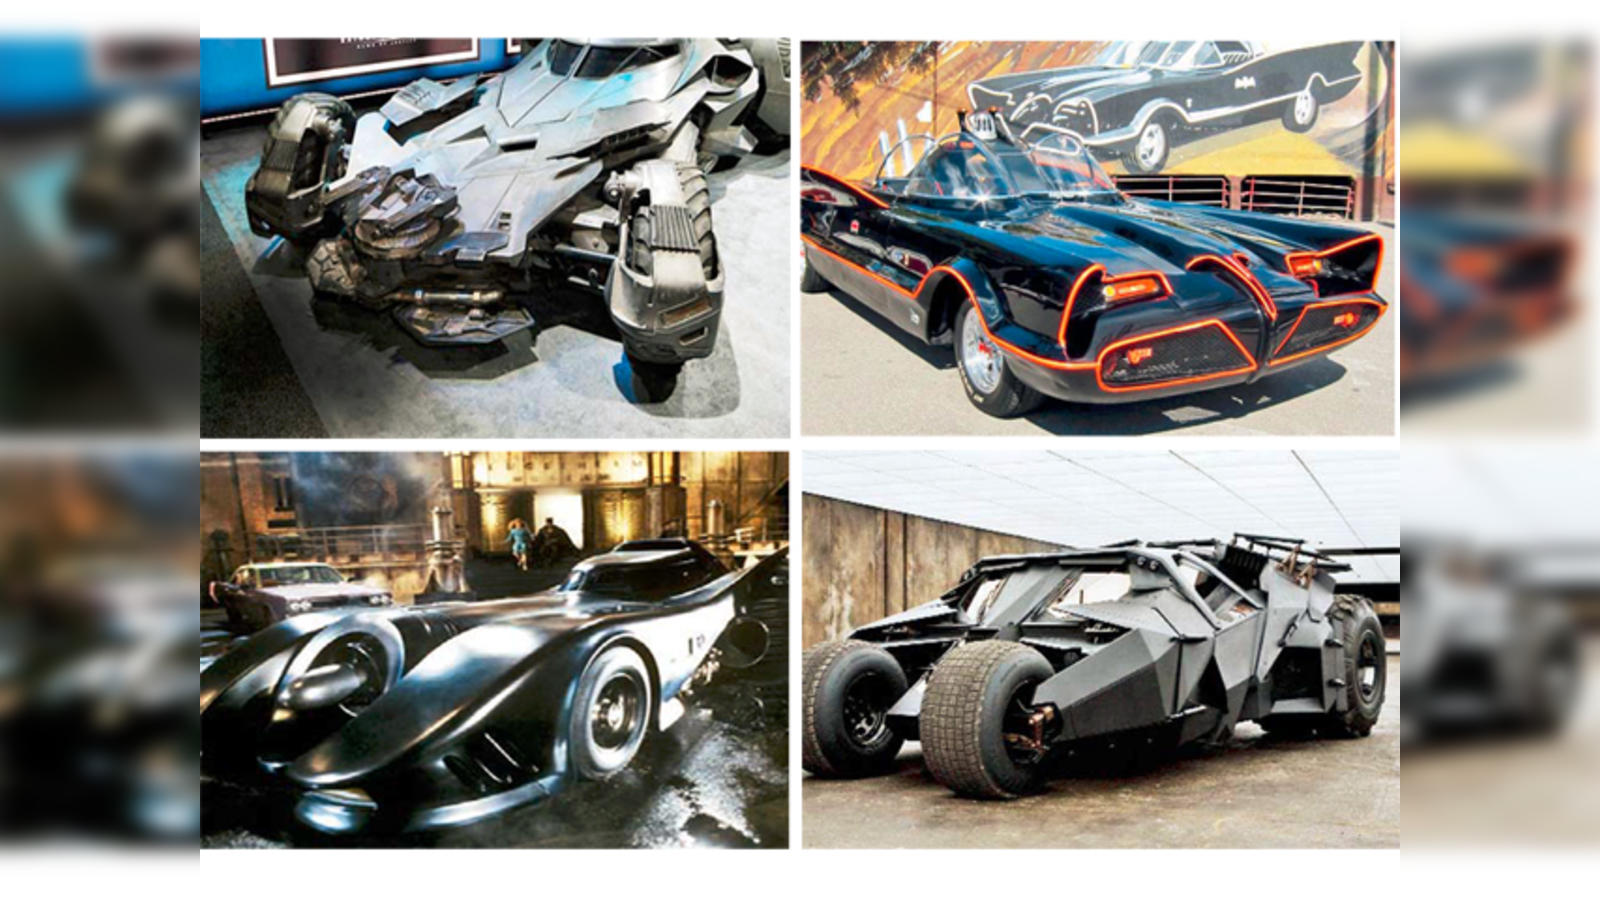 The Only Turbine-Powered Batmobile in the World Is (Still) Looking